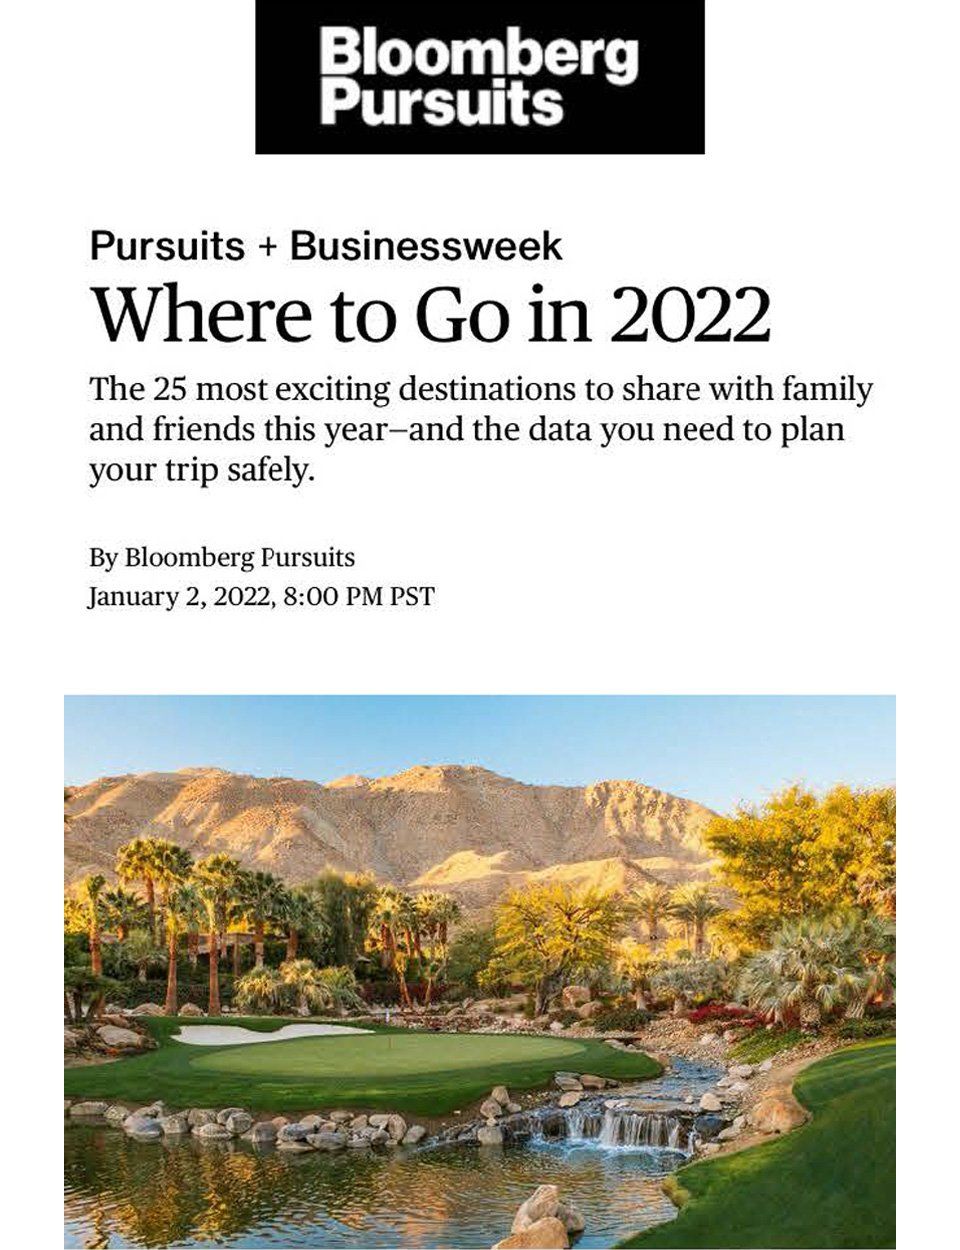 the bloomberg pursuits business week where to go in 2022